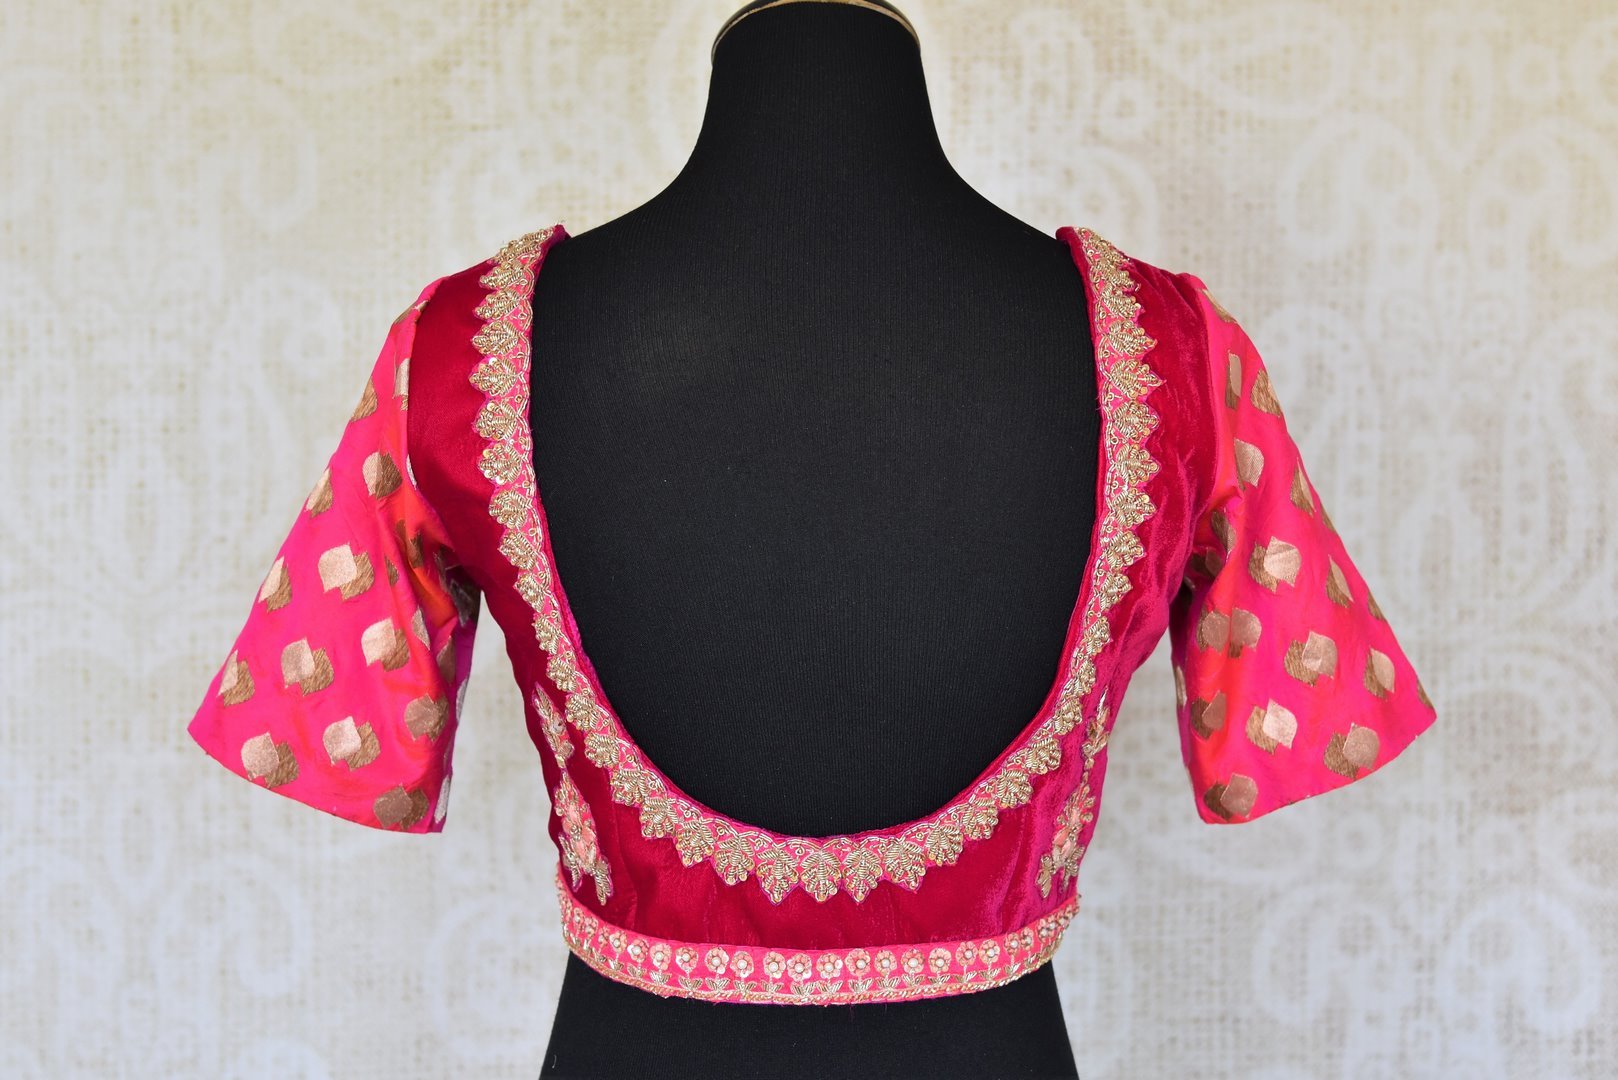 Shop pink Banarasi embroidered readymade sari blouse online in USA. Complete your saree look with exquisite designer readymade saree blouses from Pure Elegance Indian clothing store in USA. -back